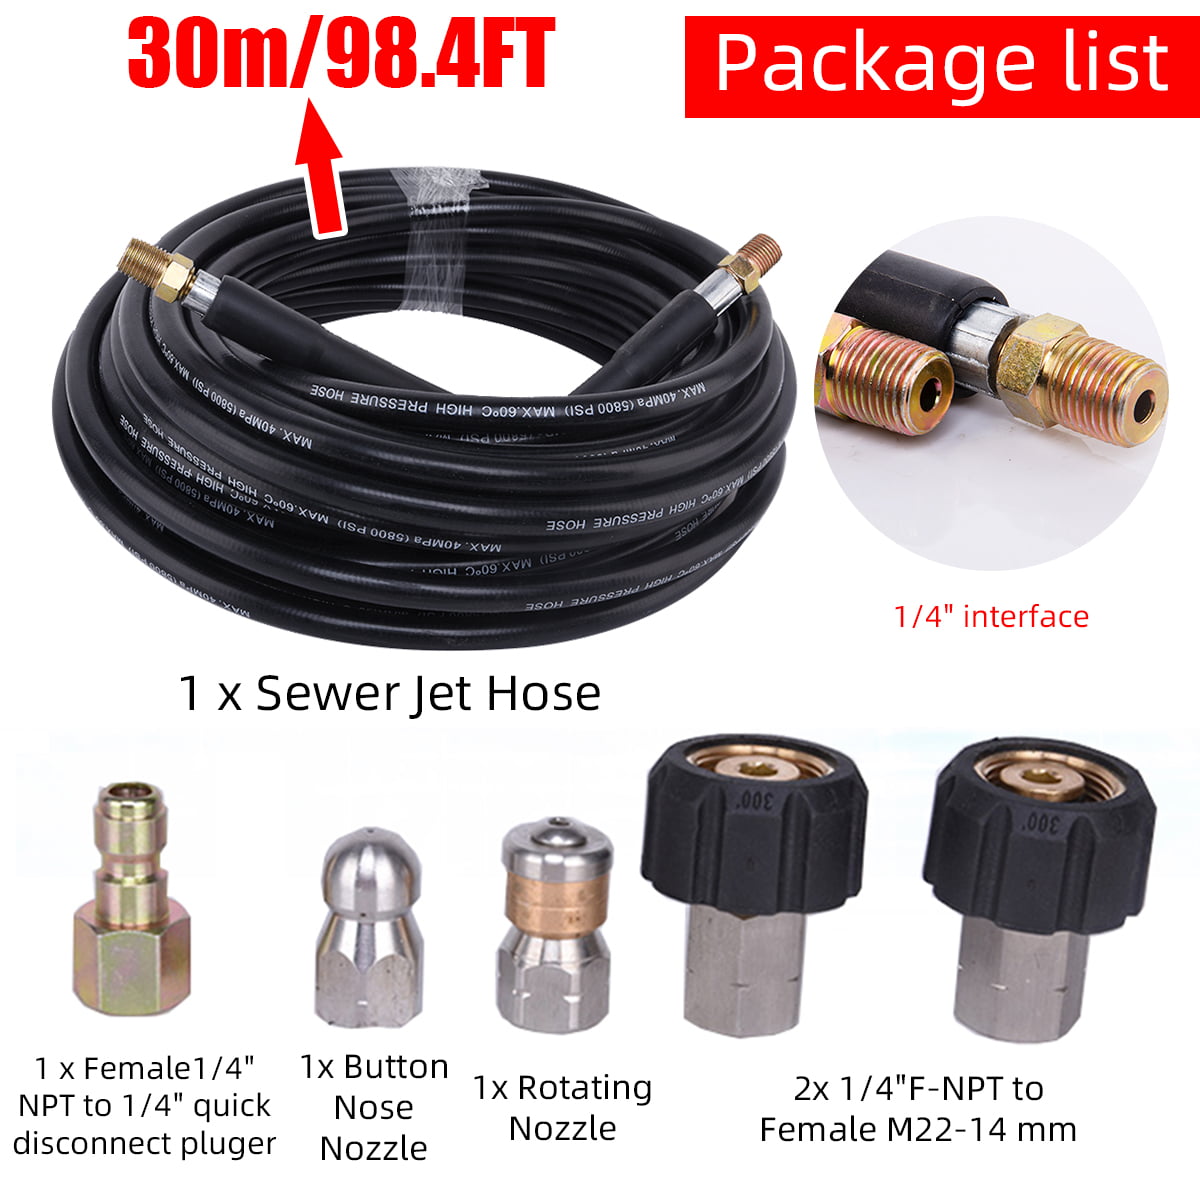 50 FT Xiny Tool Sewer Jetter Kit for Pressure Washer Orifice 4.0 Button Nose and Rotating Sewer Jetting Nozzle 1/4 Inch NPT Drain Cleaning Hose 4000 PSI